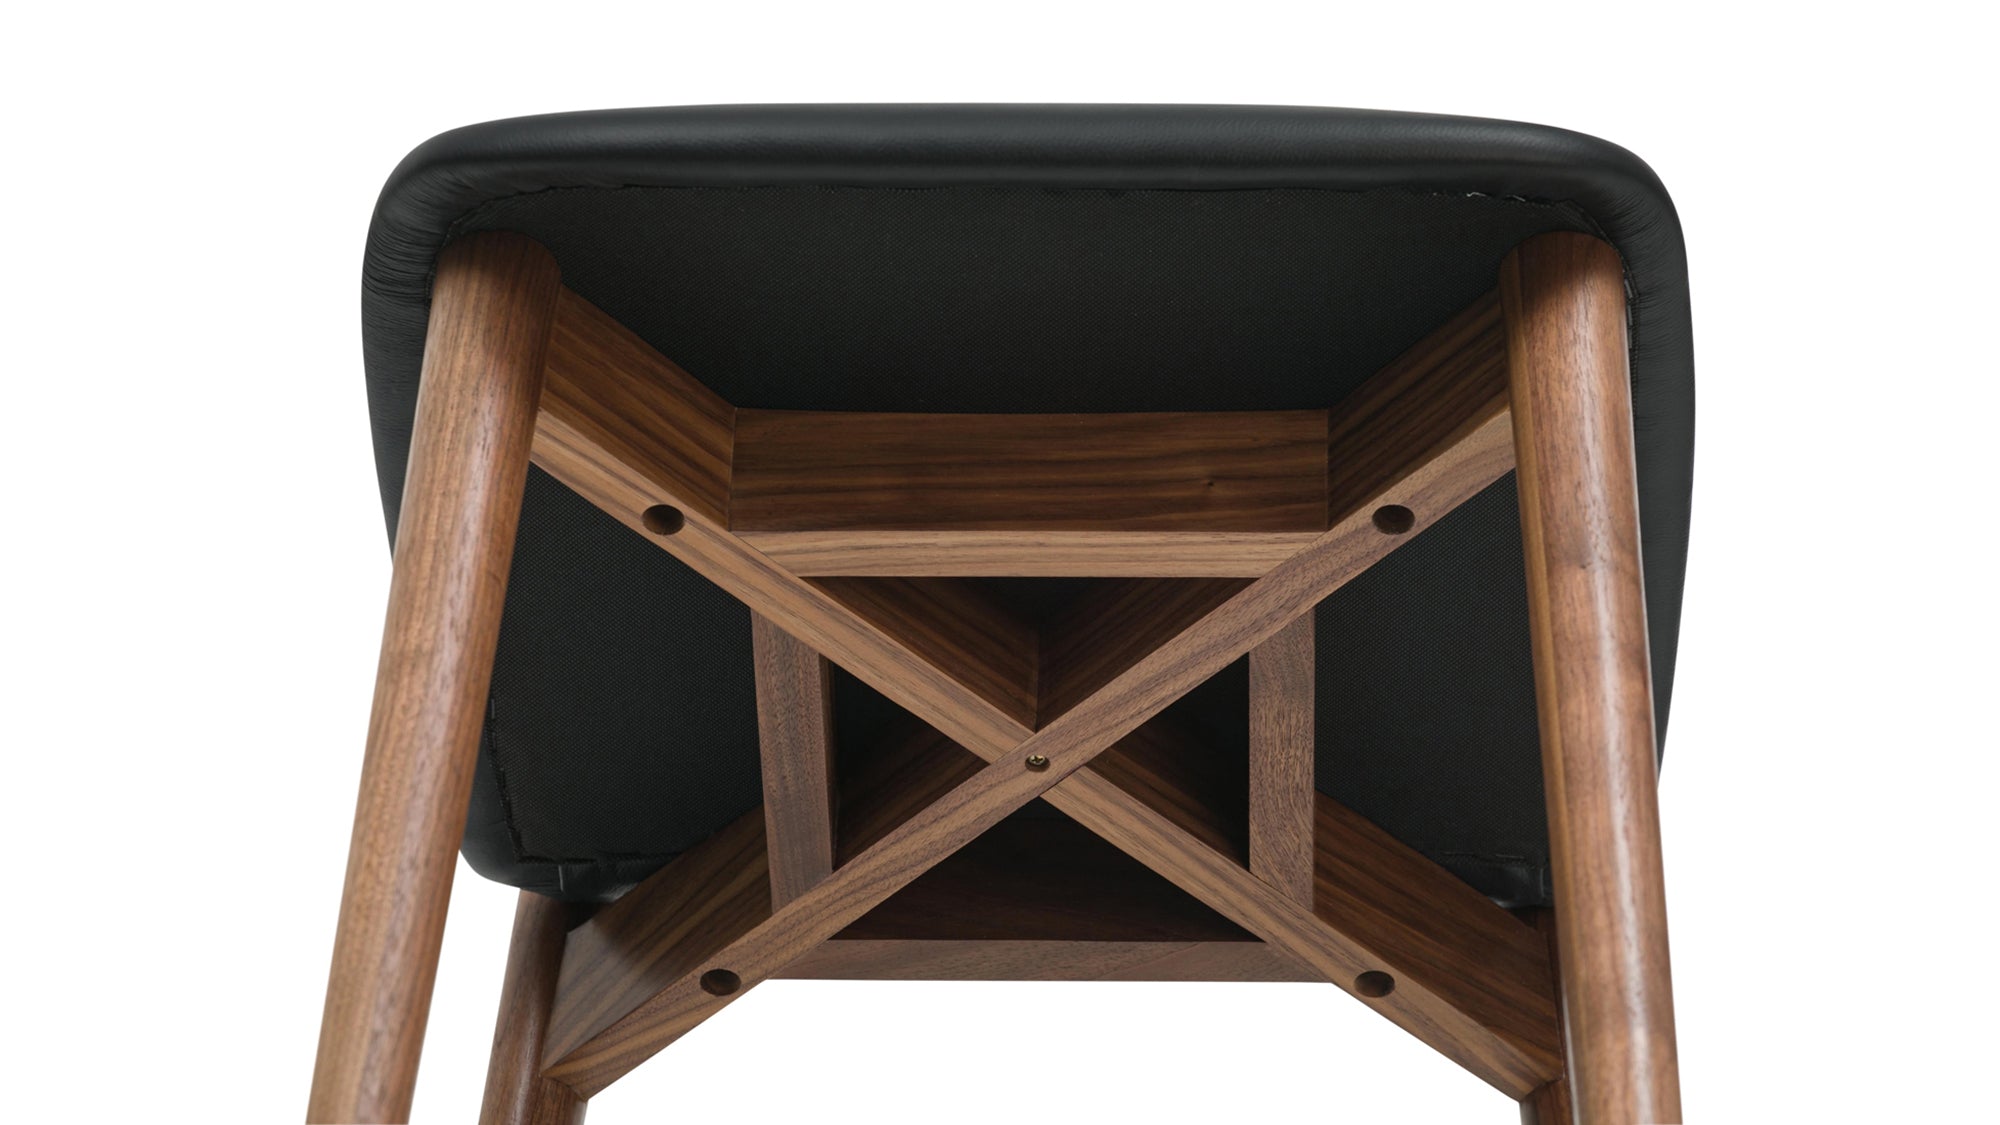 Dine In Stool, Counter, Walnut/Black Leather - Image 7